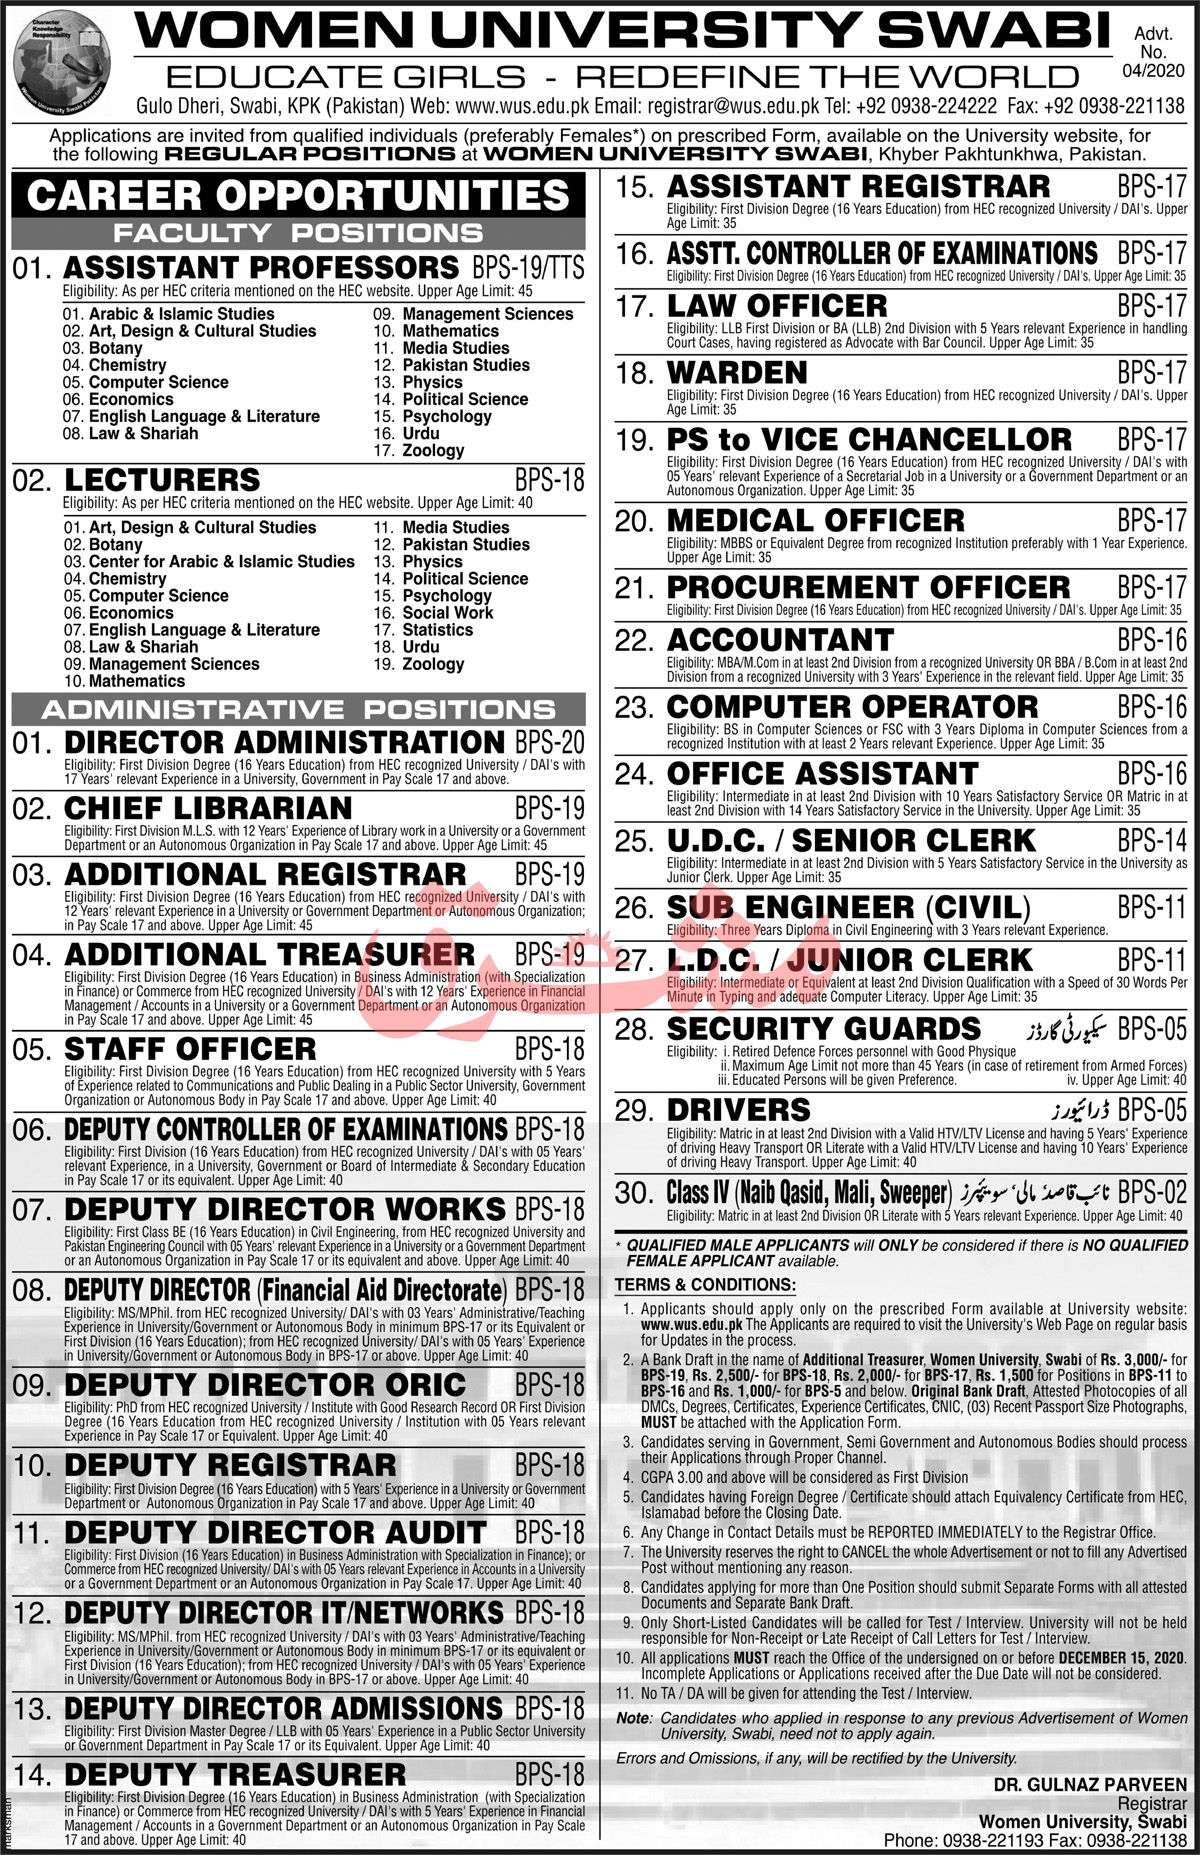 Vacant Positions: Accountant Additional Registrar Assistant Controller of Examinations Assistant Professors Assistant Registrar Chief Librarian Computer Operator Deputy Controller of Examinations Deputy Director Admissions Deputy Director Audit Deputy Director of IT/Networks Deputy Director ORIC Deputy Director Works Deputy Registrar Deputy Treasurer Director Administration Drivers Law Officer LDC/Junior Clerk Lecturers Mali Medical Officer Naib Qasid Office Assistant Procurement Officer PS to Vice Chancellor Security Guards Staff Officer Sub Engineer Sweeper UDC/Senior Clerk Warden How to Apply: Applicants should apply on the prescribed form available at the University website: www.wus.edu.pk. A Bank Draft in the name of Additional Treasurer, Women University Swabi of Rs. 3, 000/- BPS-19, Rs. 2500/- for BPS-18, 2, 000/- for BPS-17, Rs. 1500/- for positions in BPS-11 to BPS-16 and Rs. 1000/- for BPS-05 and below. Original Bank Draft, Attested photocopies of all DMCs, Degrees, Certificates, Experience Certificates, CNIC, 03 recent passport size photographs, must be attached with the application form. All applications must reach the office of the undersigned on or before December 15, 2020. No TA/DA is admissible.